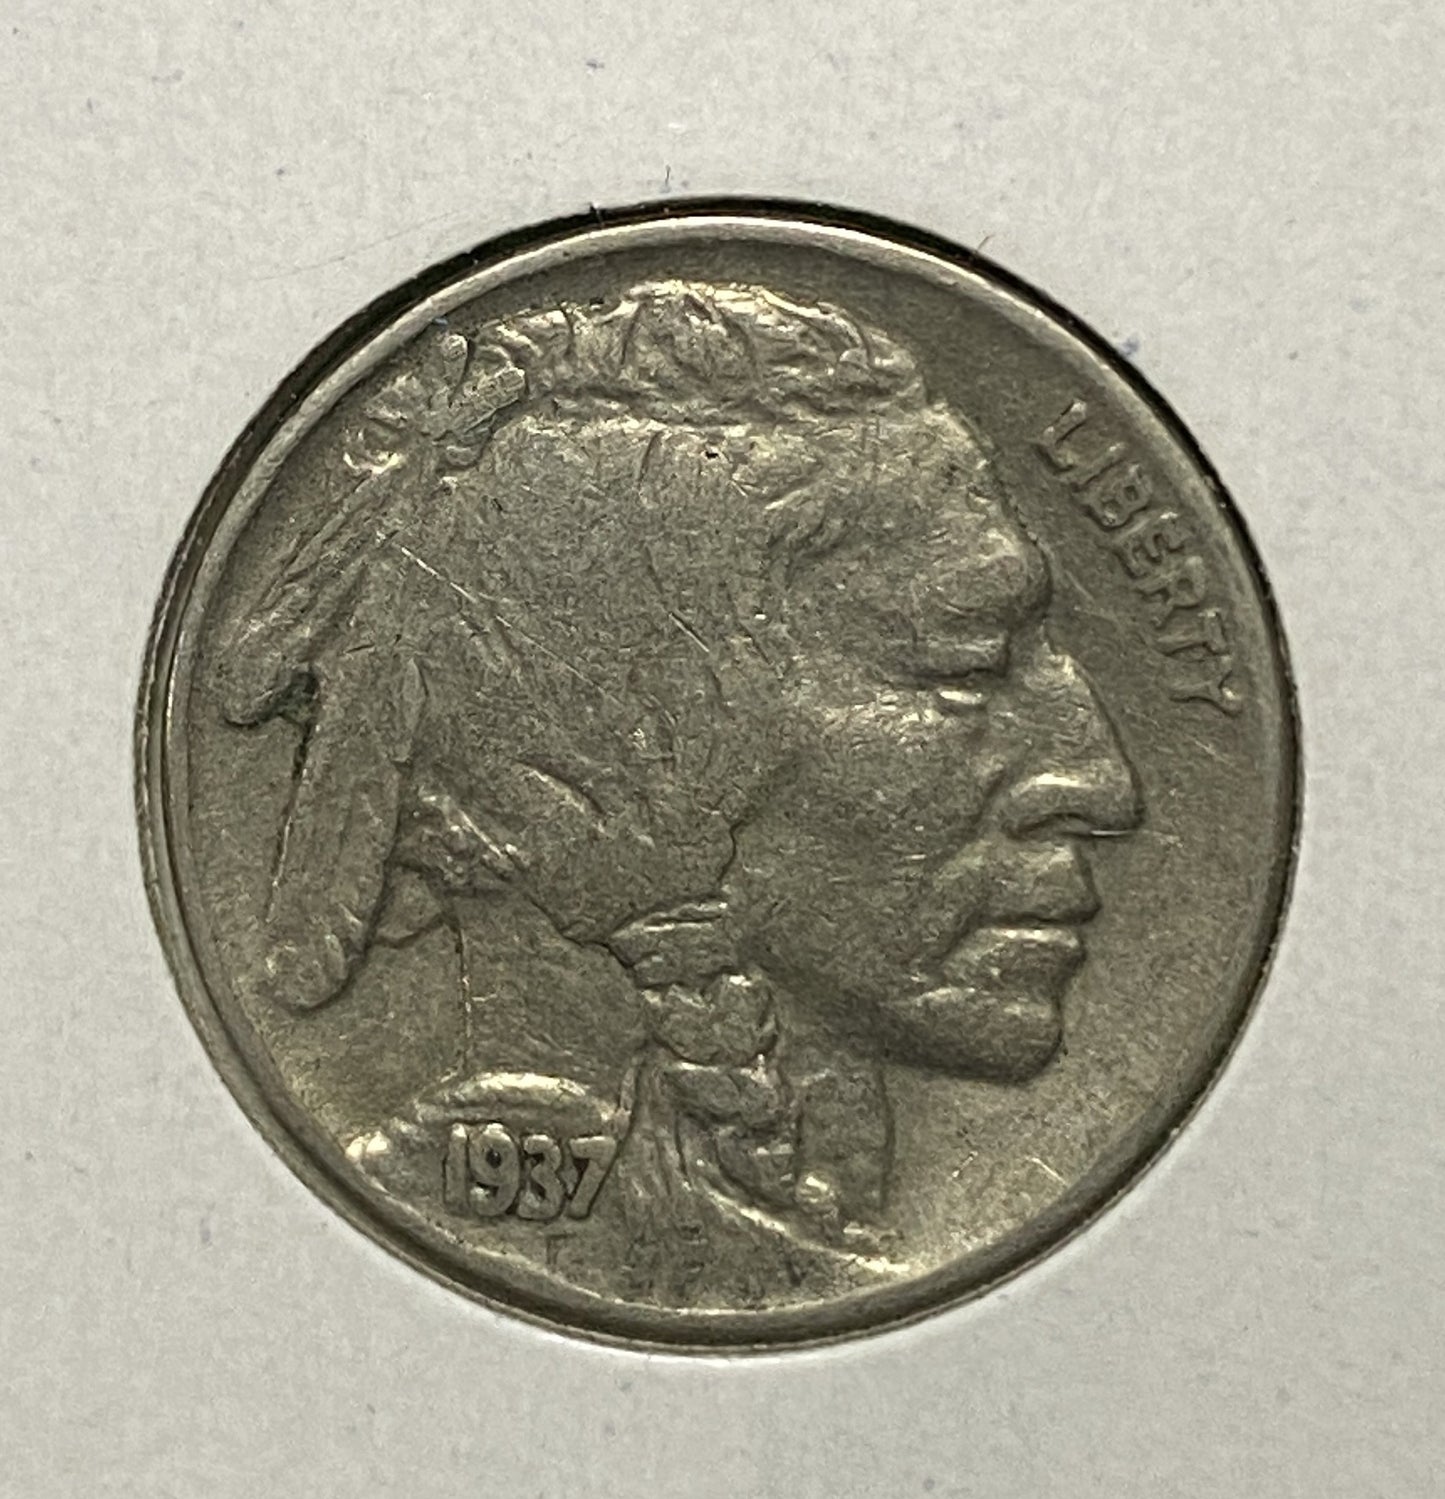 UNITED STATES BUFFALO NICKEL 1937 VG / VG+ 5 CENT COIN